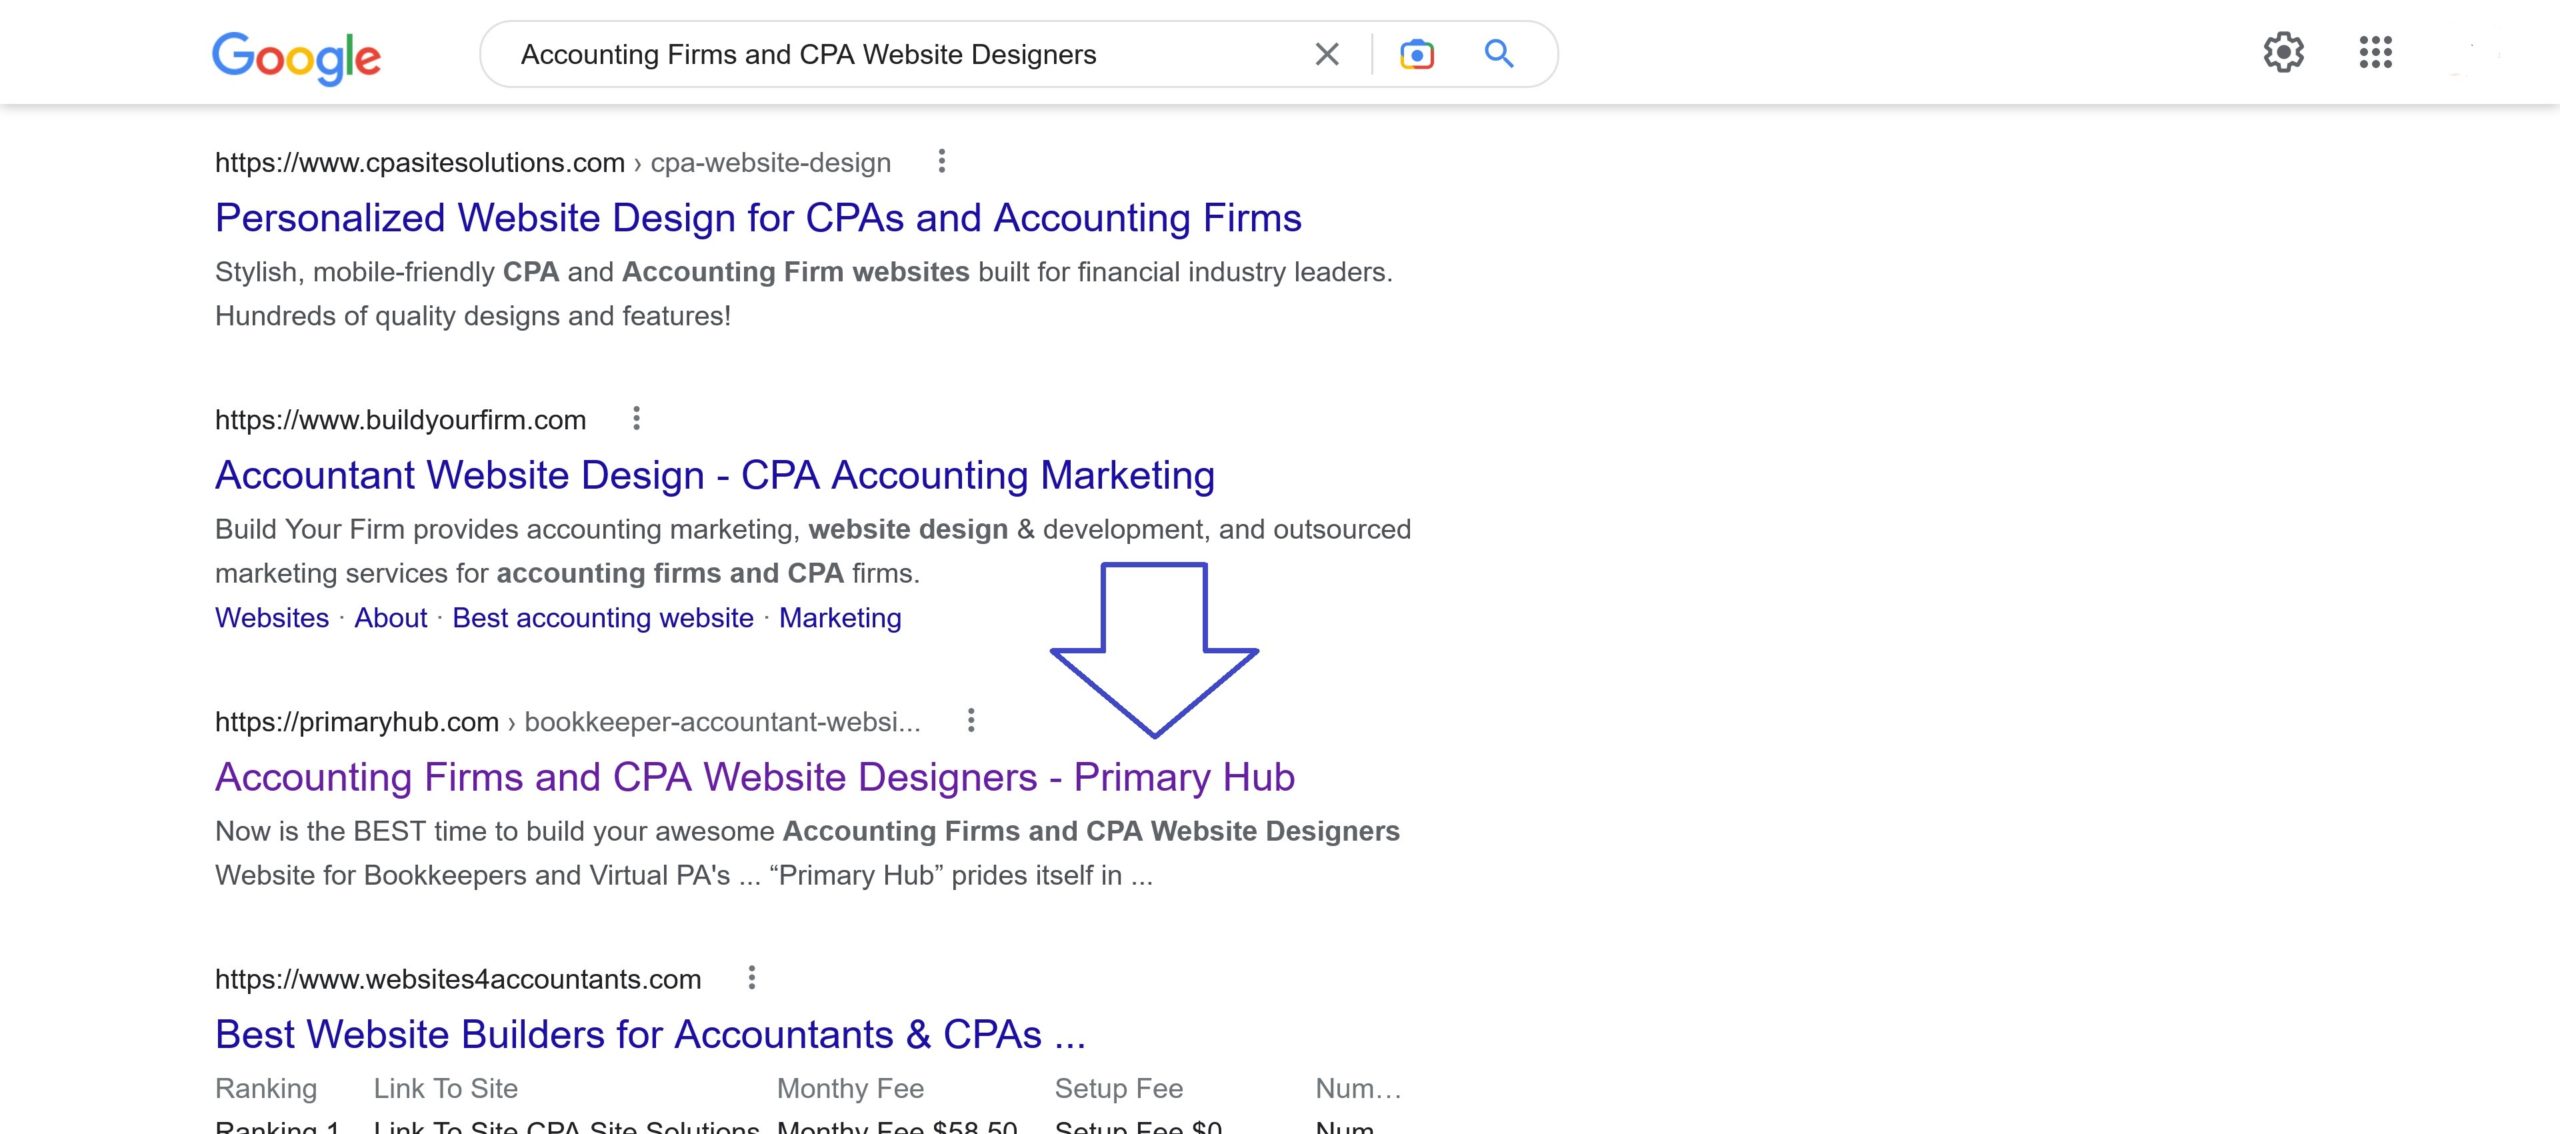  Web Design for Accountants & CPA Firms